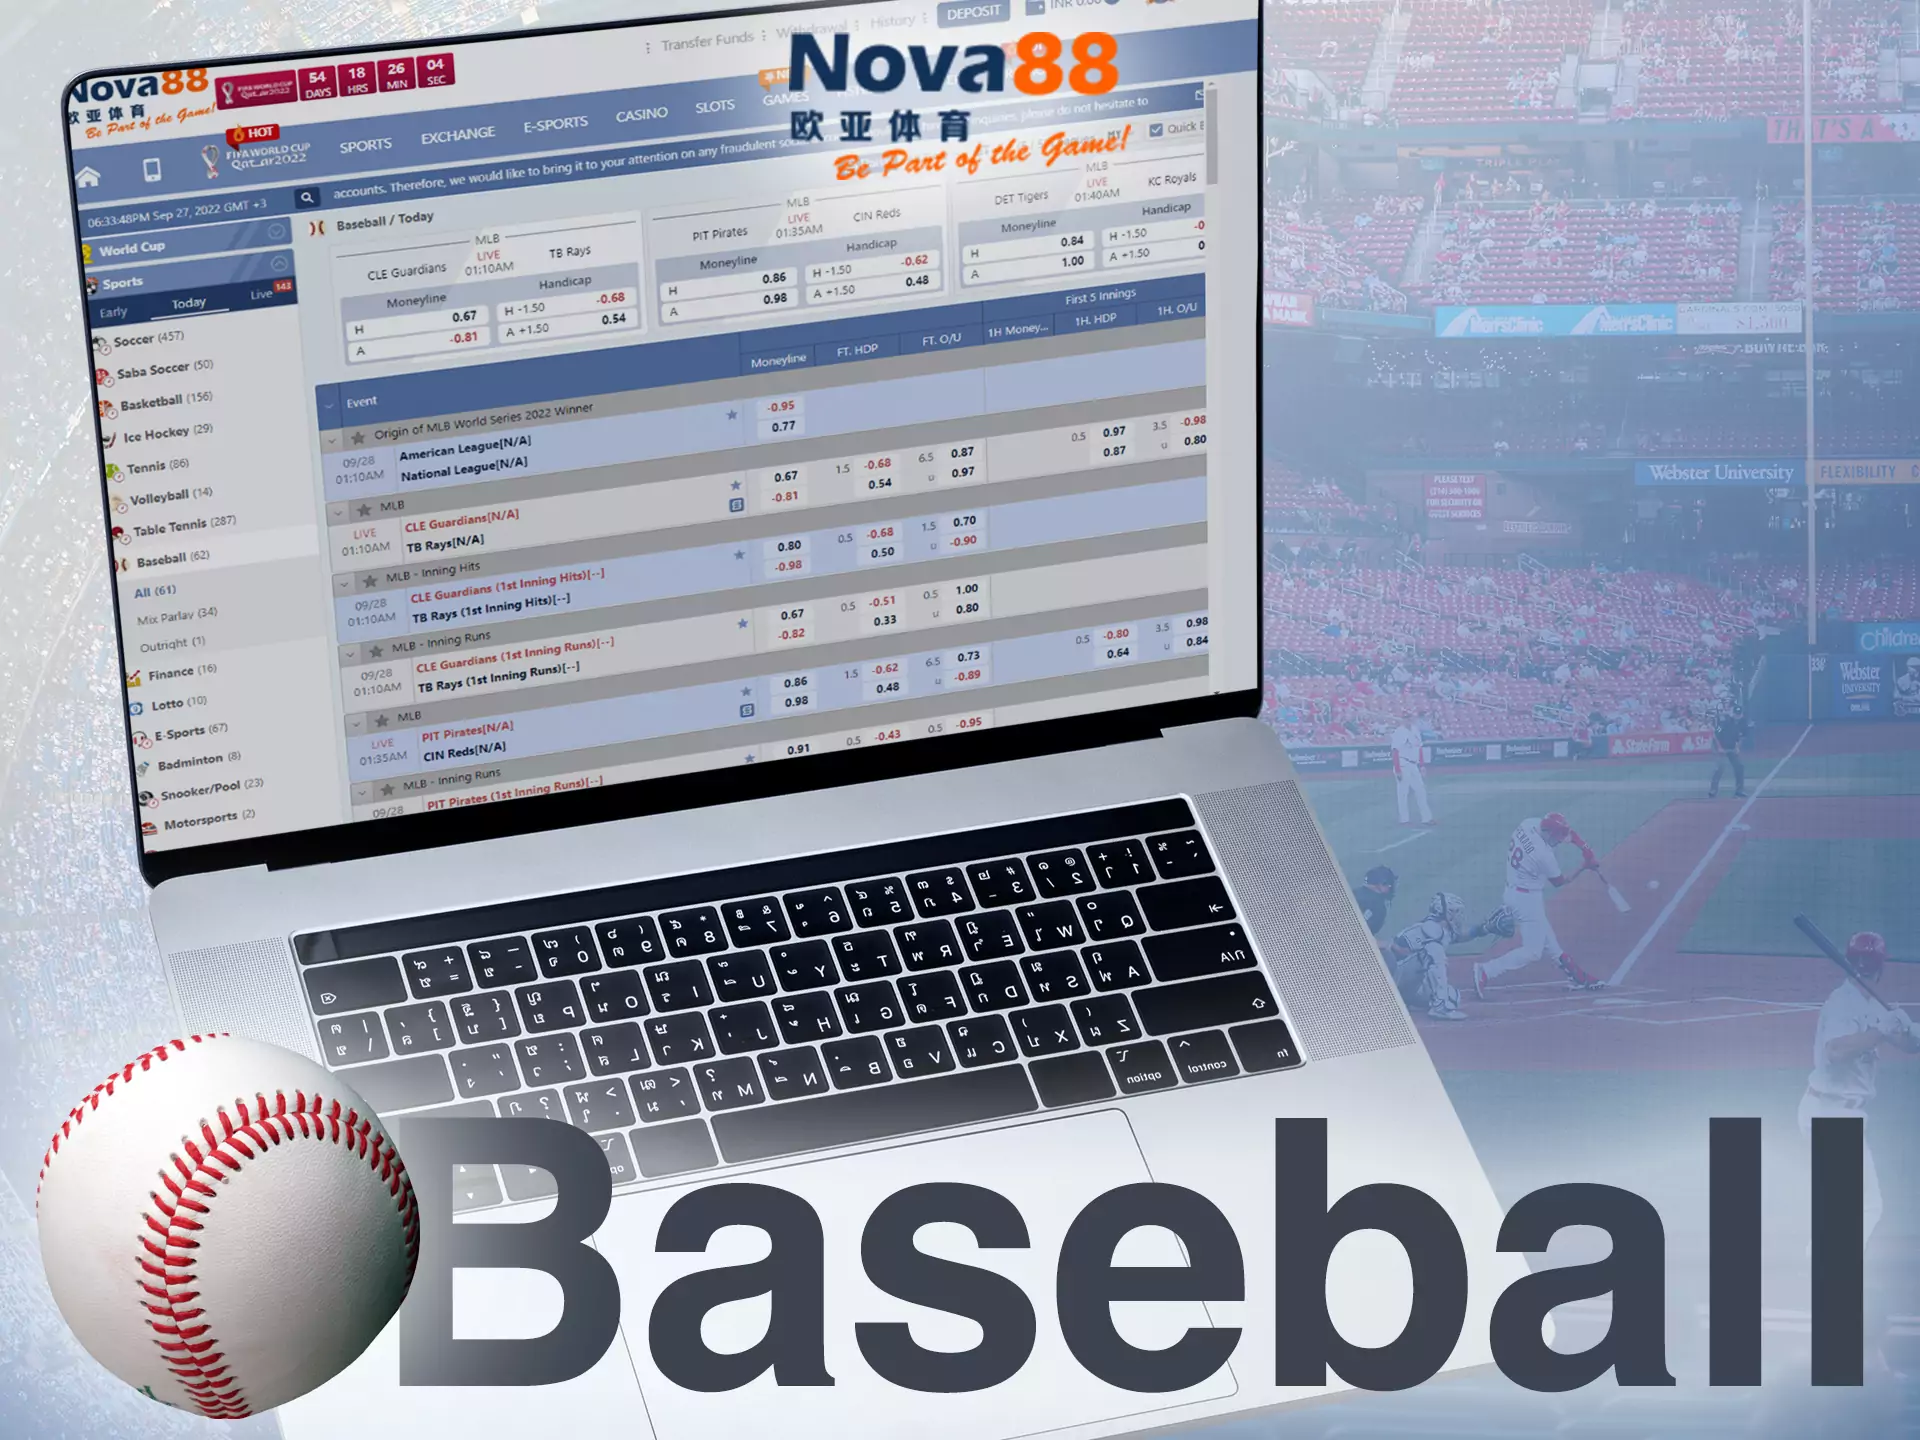 In the Nova88 sportsbook, you can bet on baseball events.